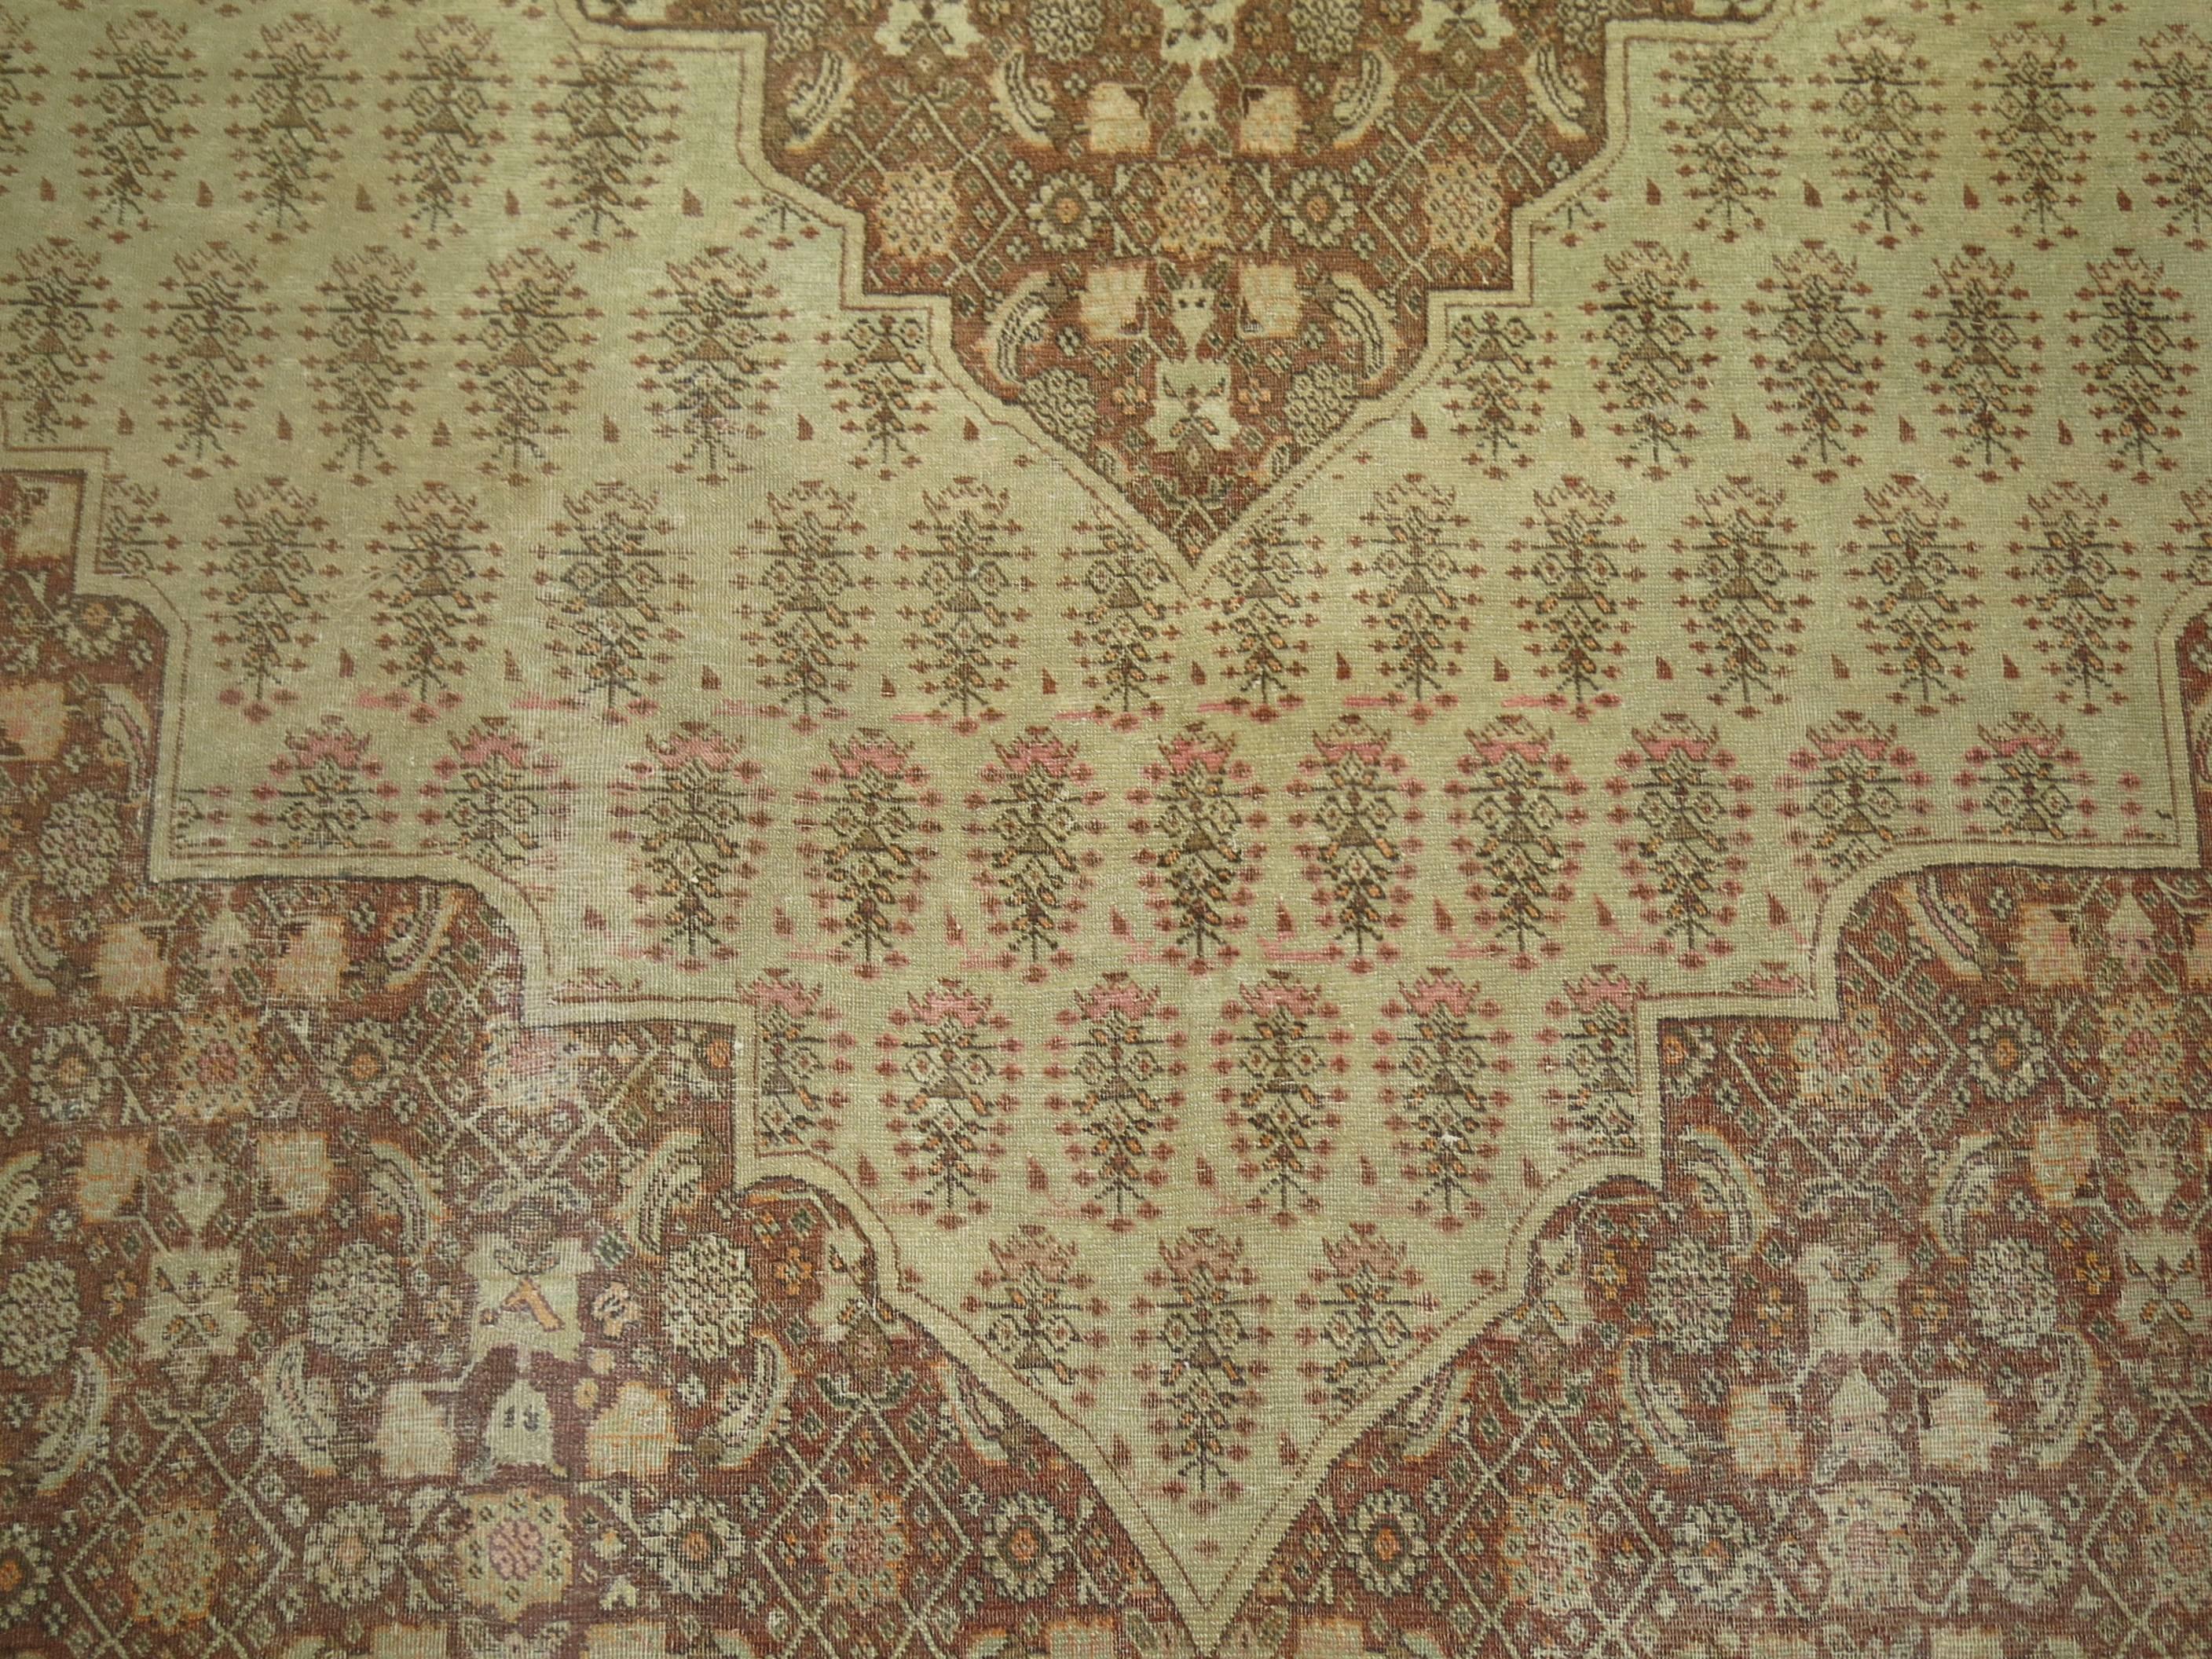 Antique Persian Tabriz Rug Herati Pattern in Brown and Cinnamon Tones In Good Condition For Sale In New York, NY